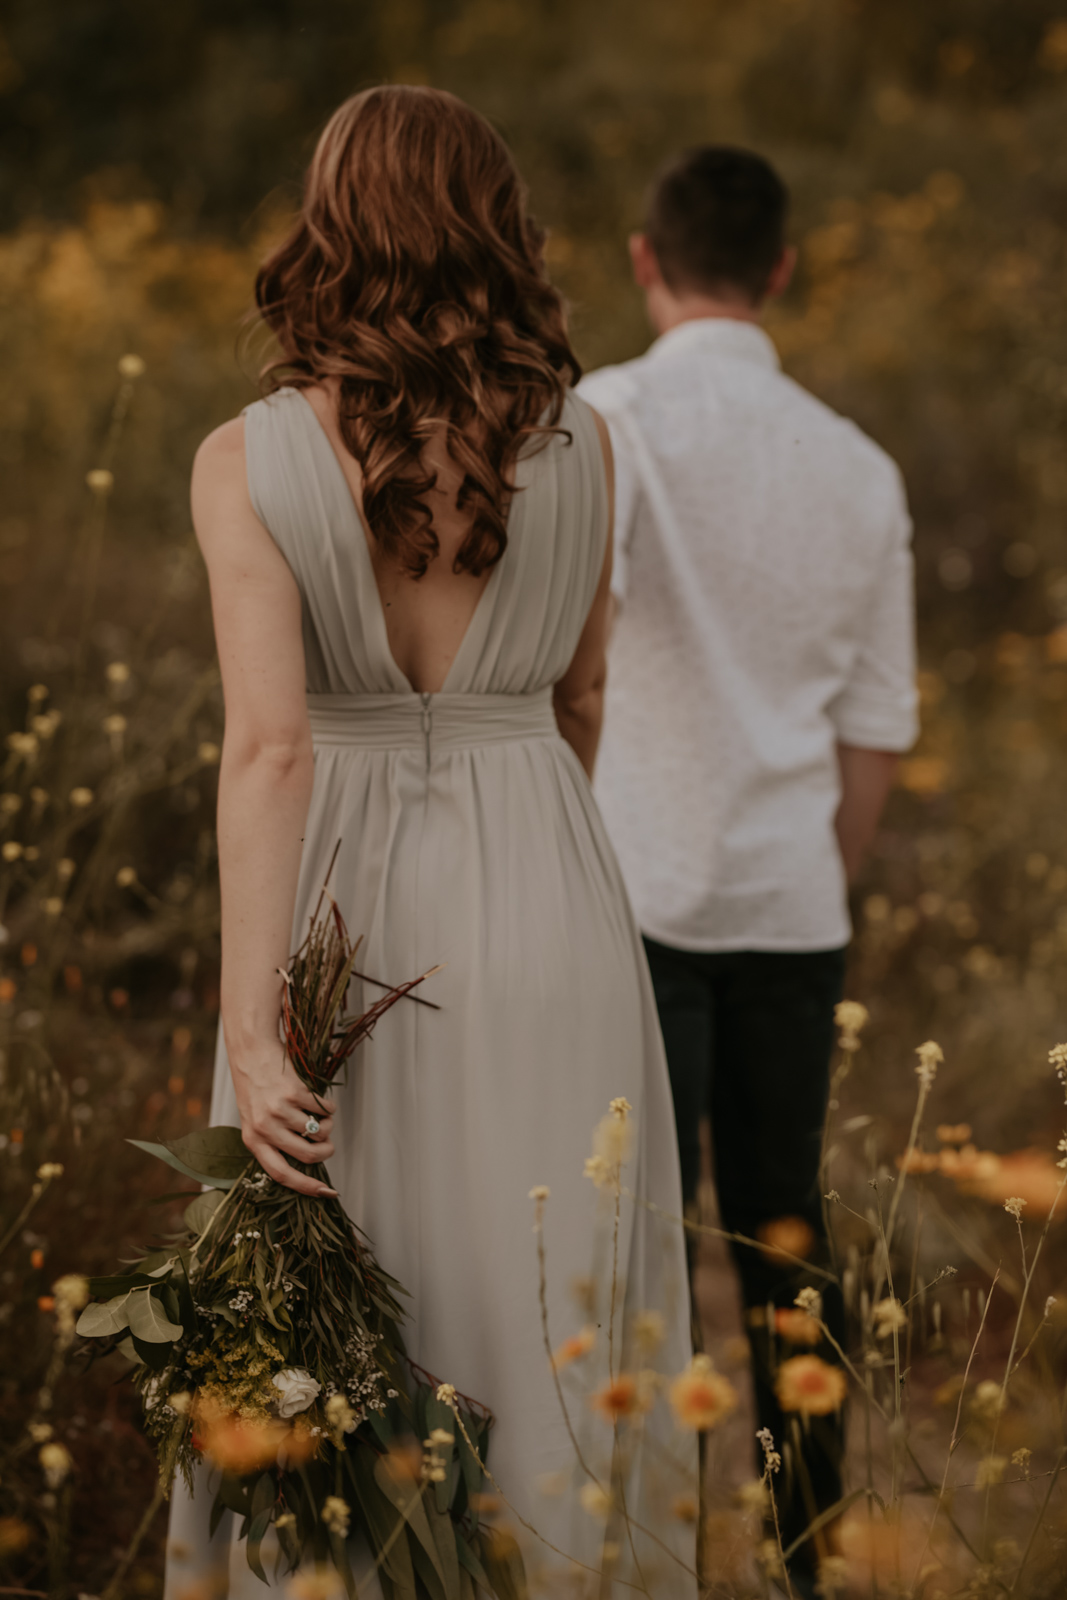 A Fairytale Engagement by Christin Mortimore